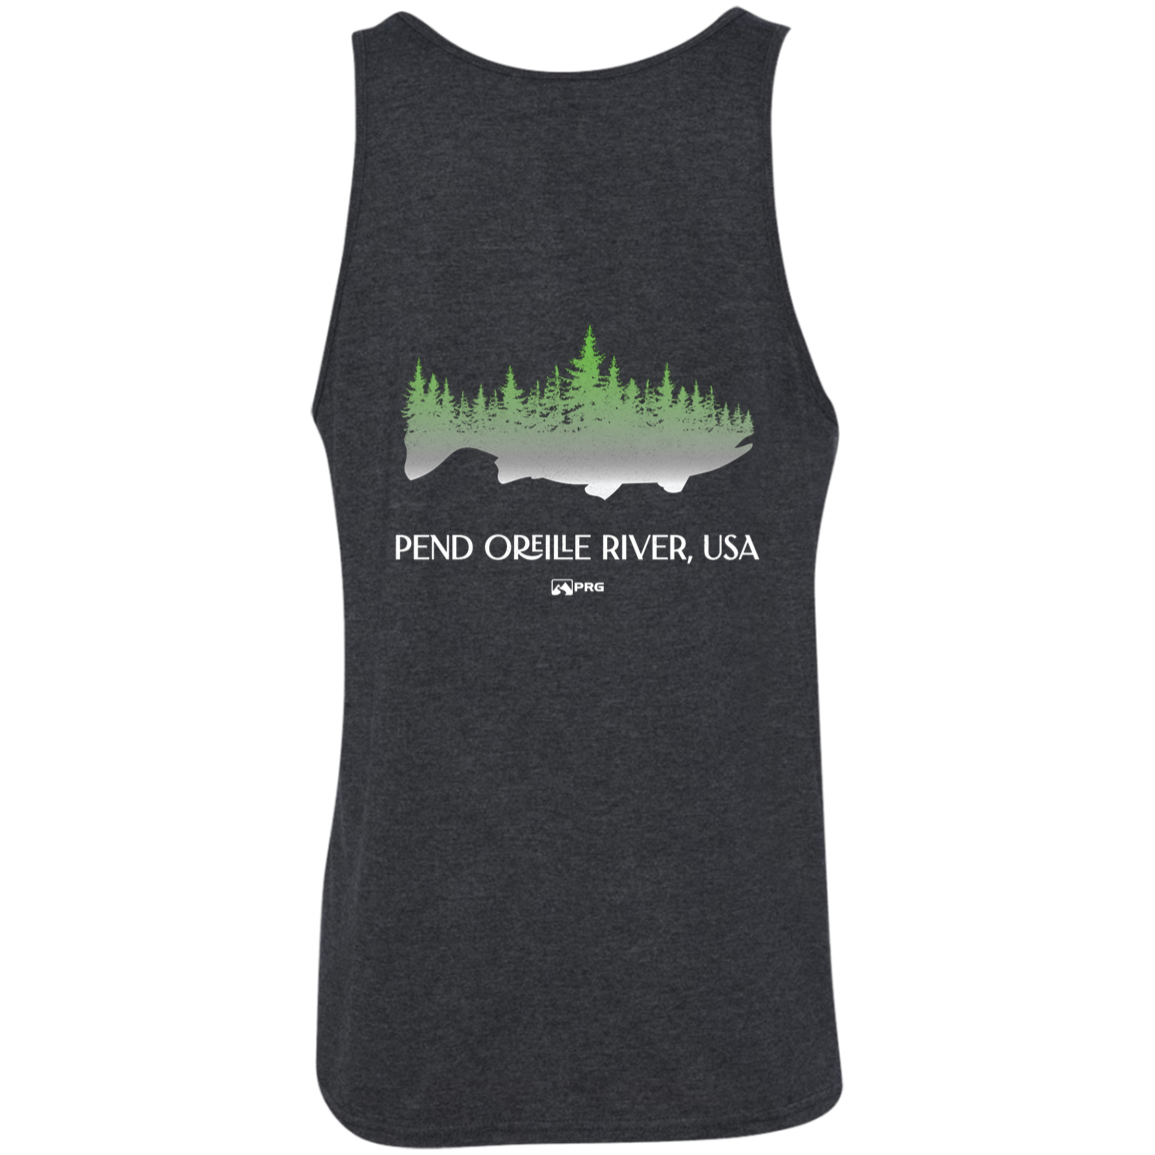 Forests & Fish (Front & Back) - Tank